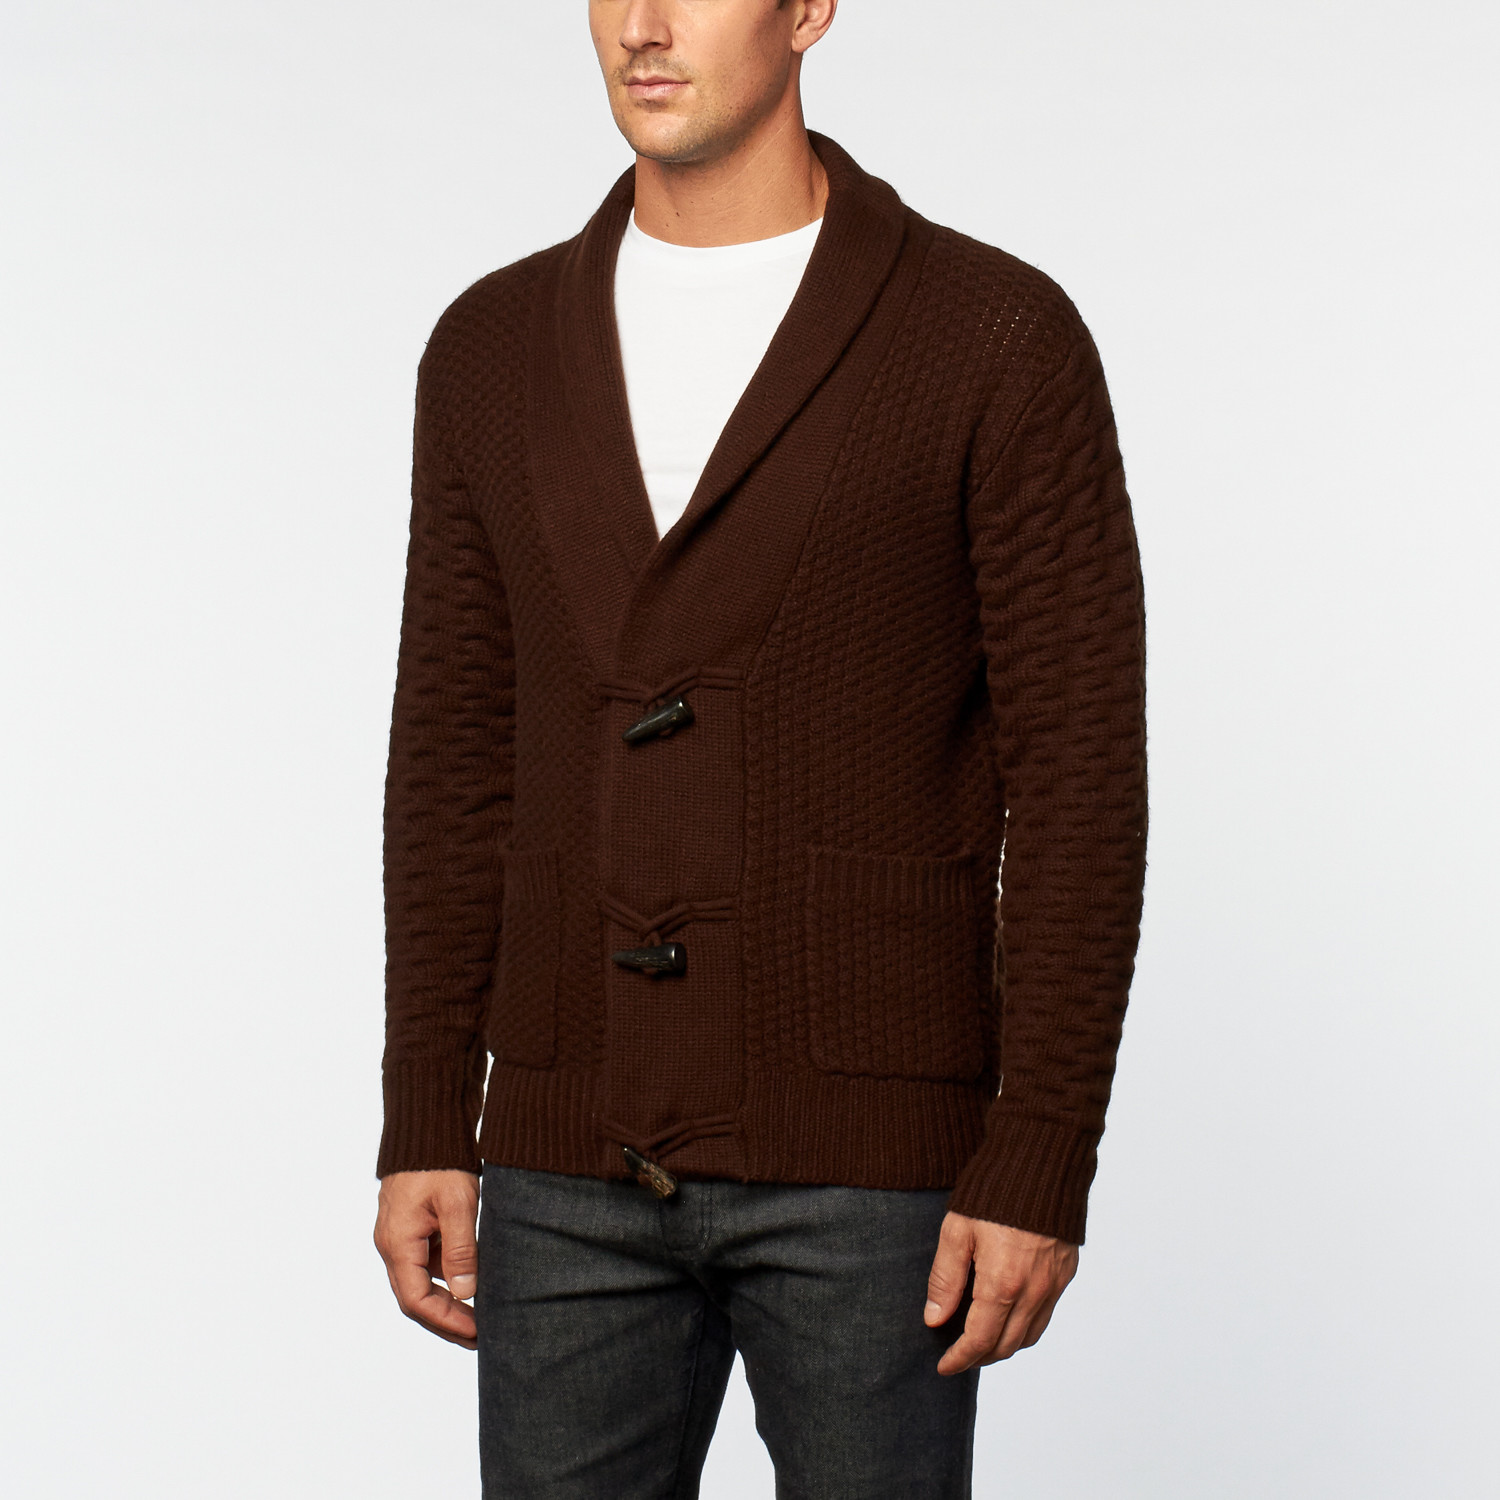 Italian Cashmere Honeycomb Cardigan // Brown (S) - Loft 604 - Touch of ...